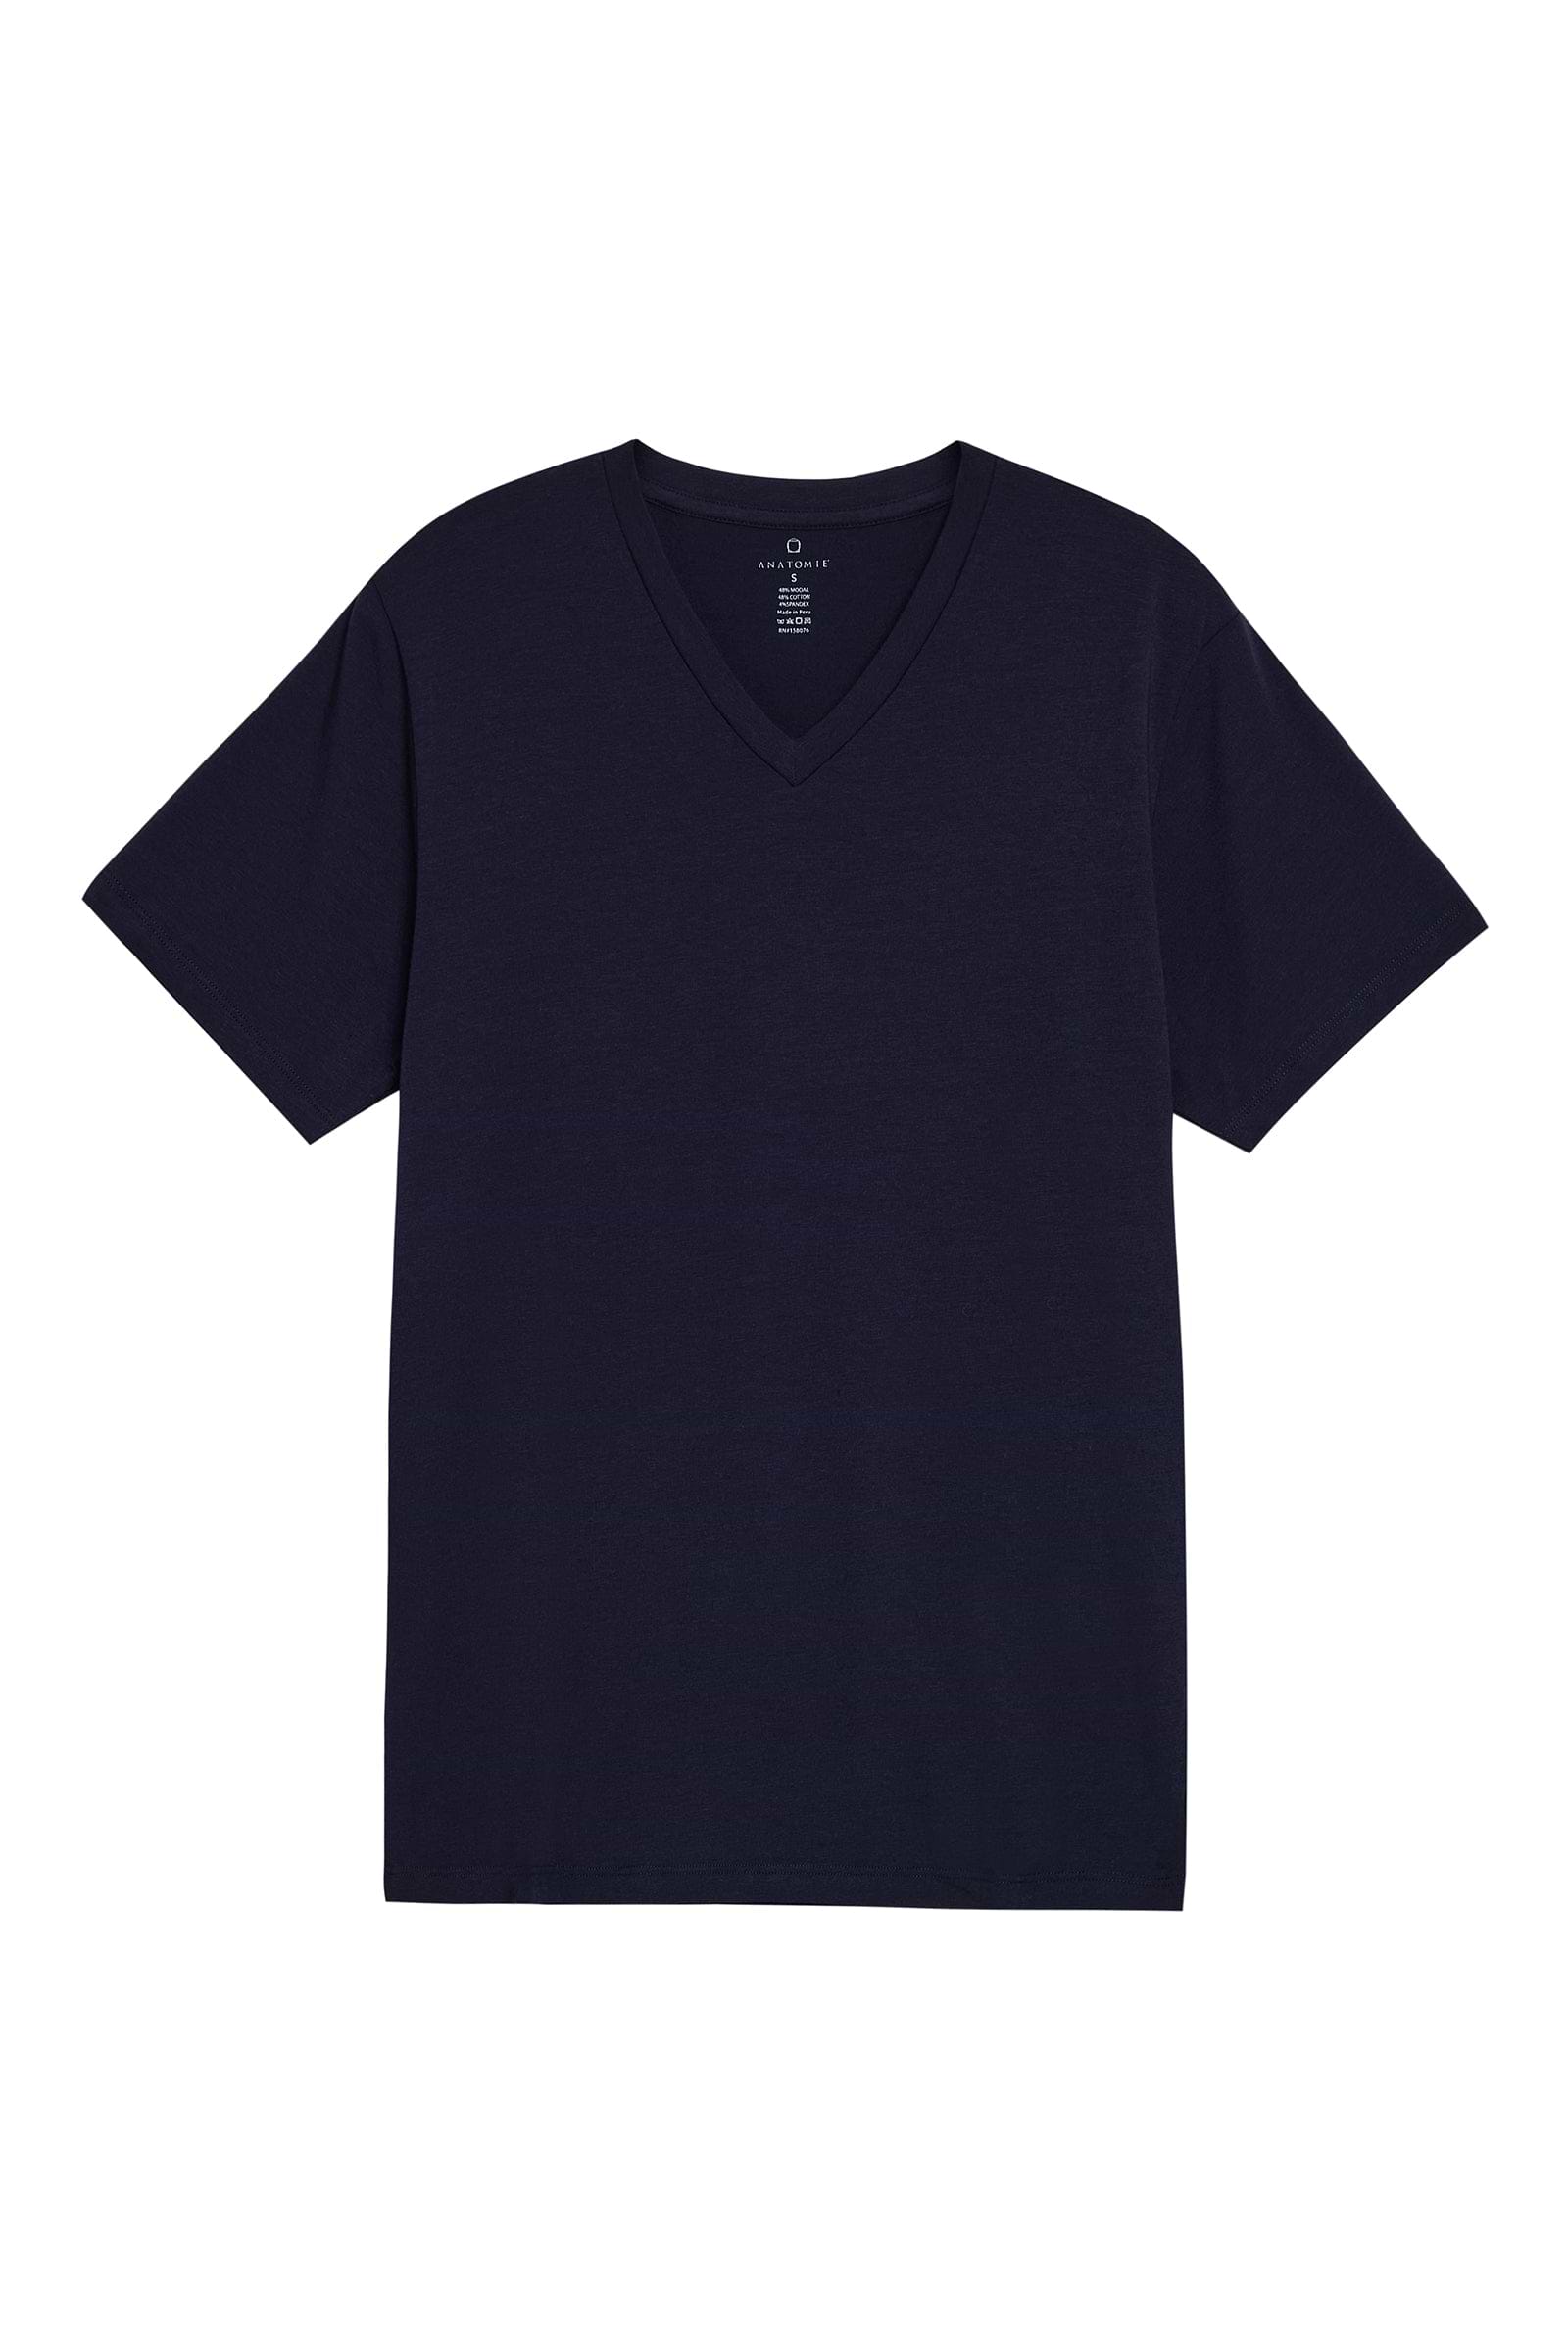 The Best Travel Top. Flat Lay of a Men's Vince Top in Navy.